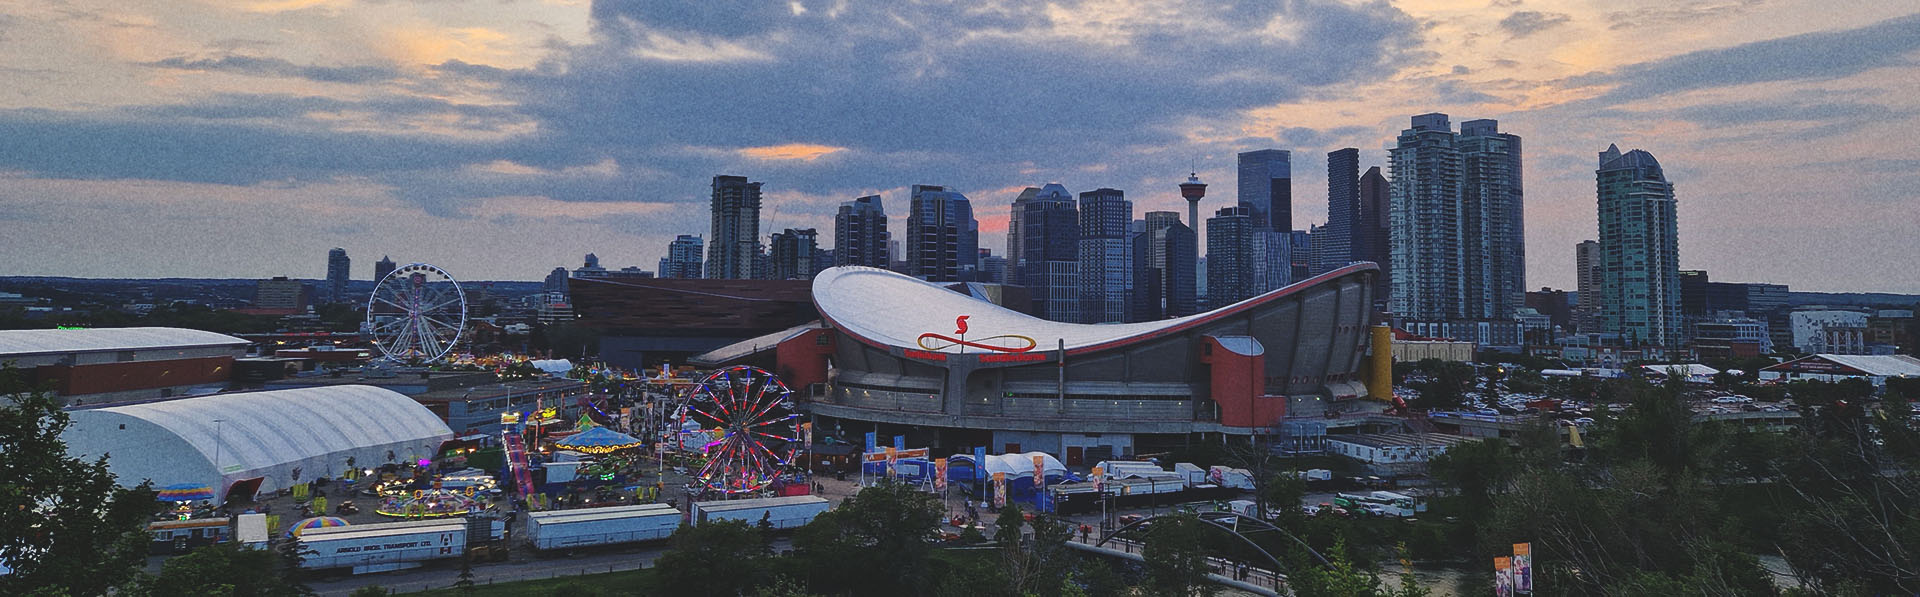 the Stampede Grounds with the Calgary skyline in the background at dusk